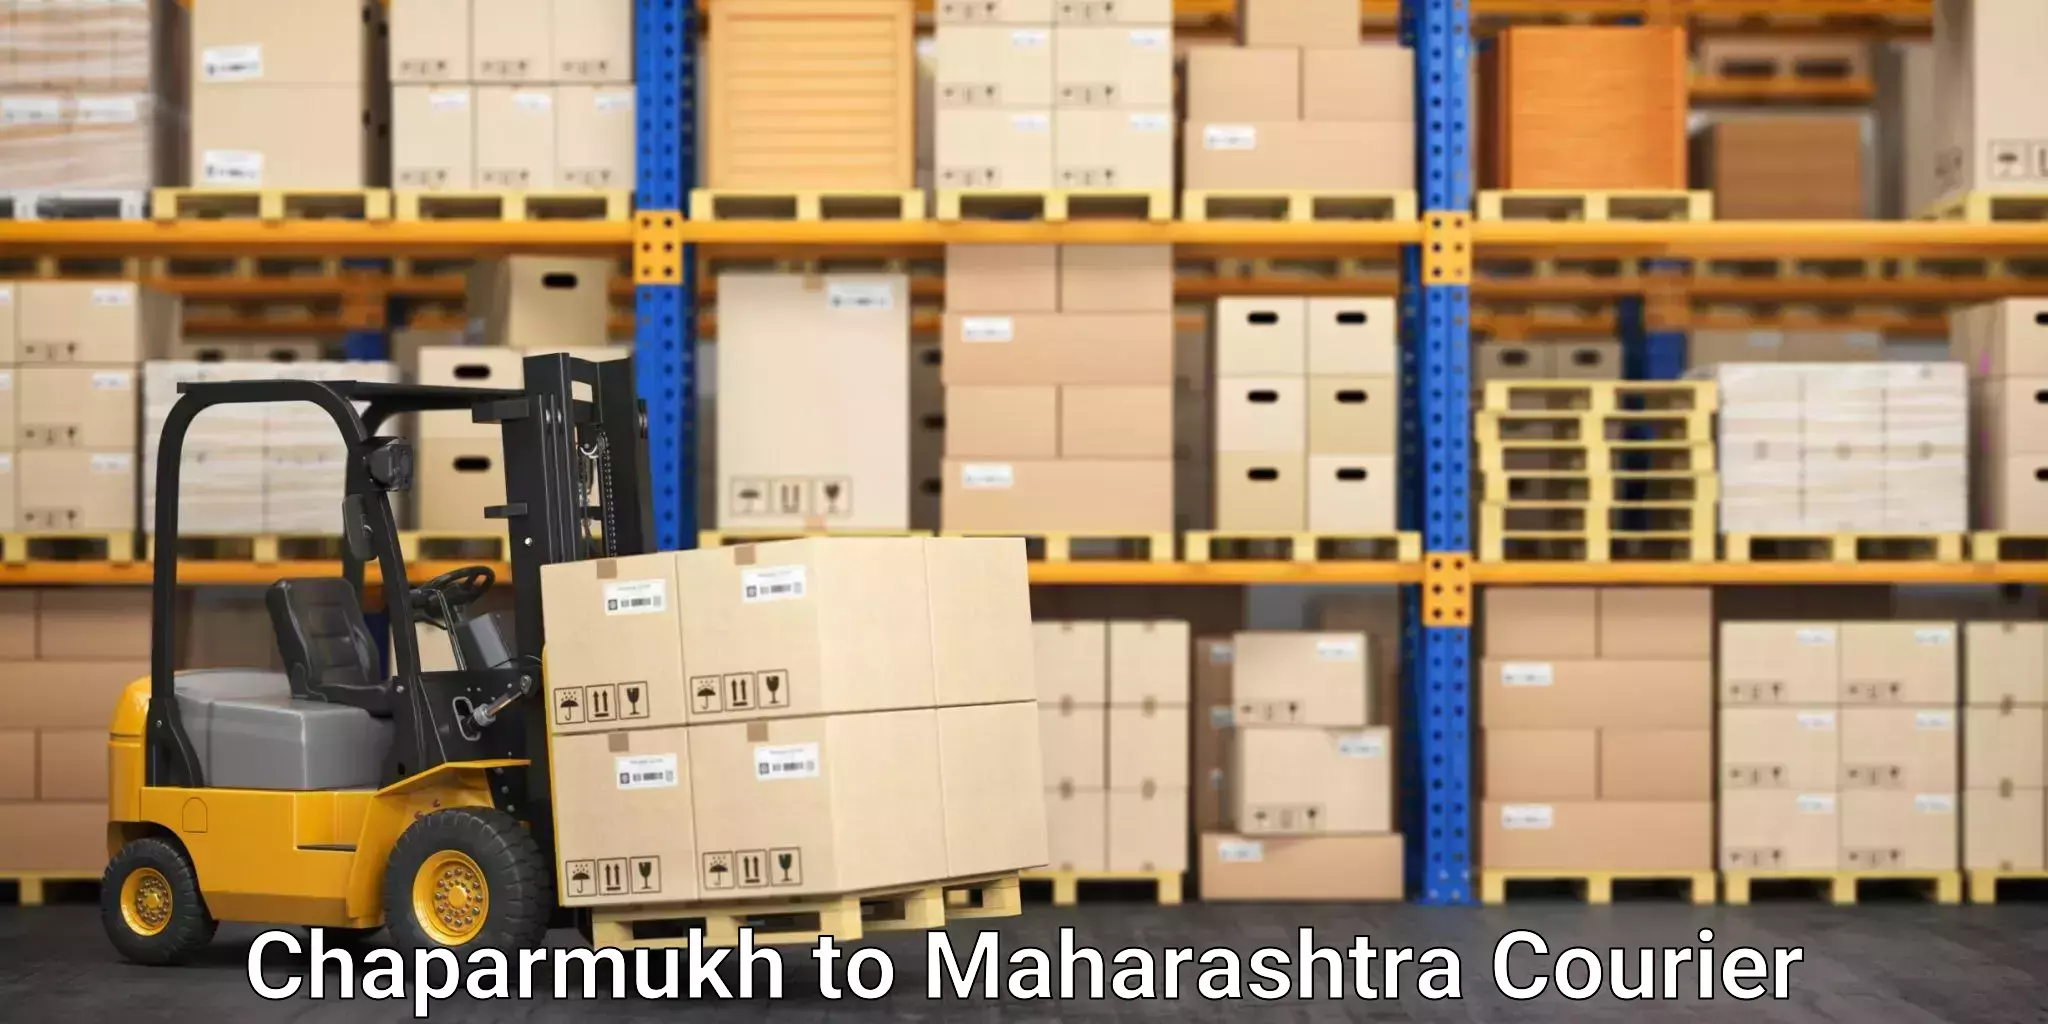 Next-day delivery options Chaparmukh to IIT Mumbai